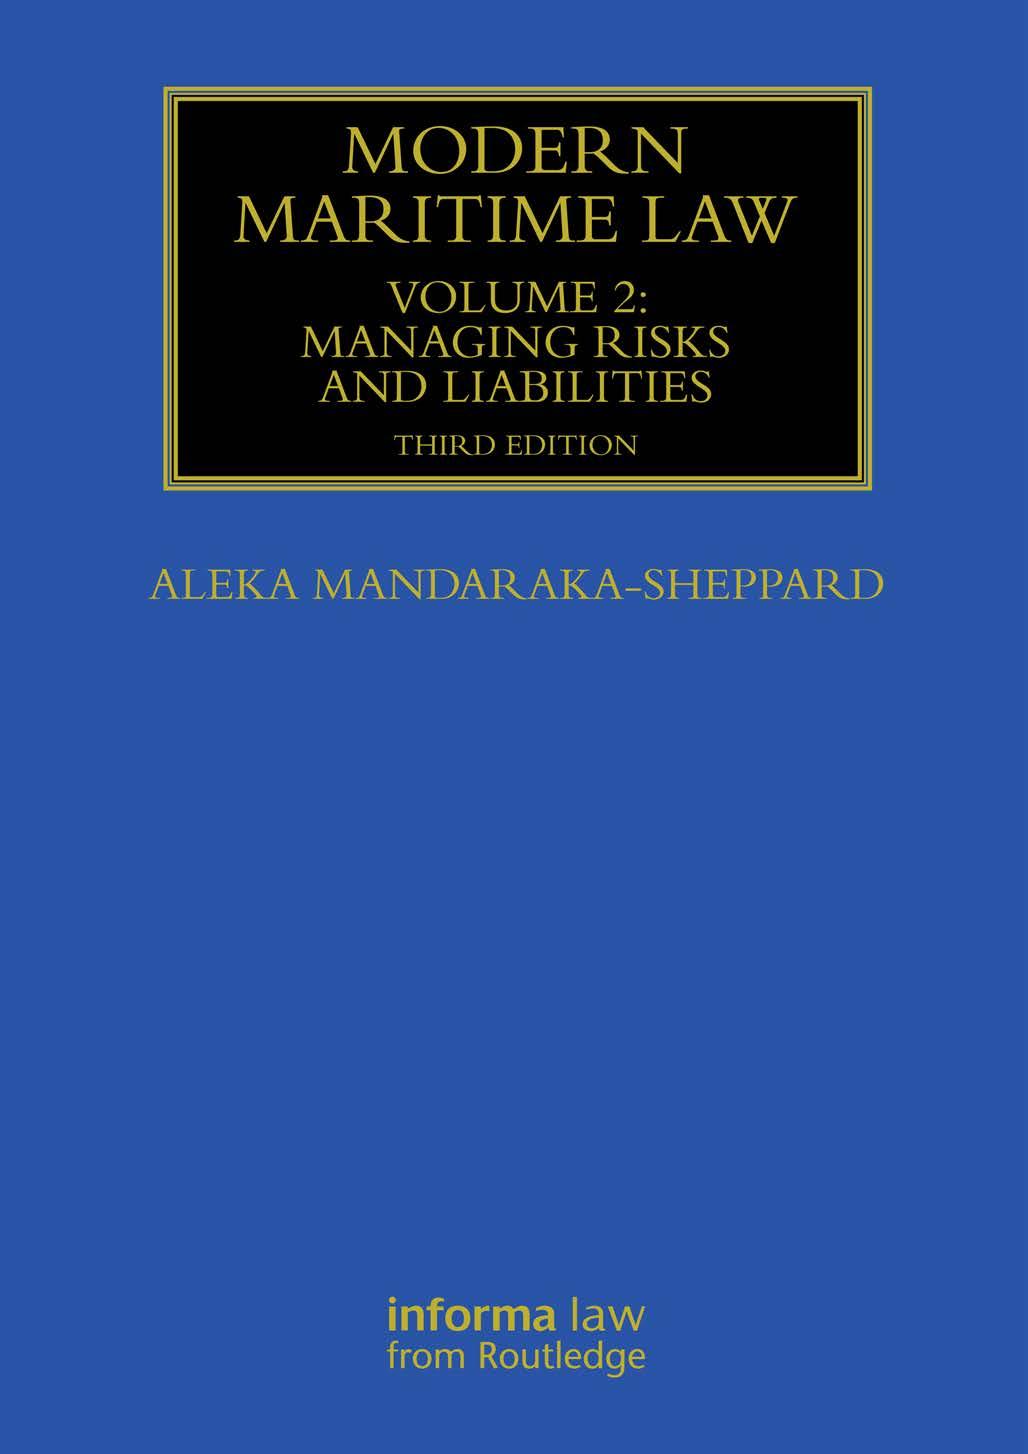 Modern Maritime Law (Volume 2): Managing Risks and Liabilities